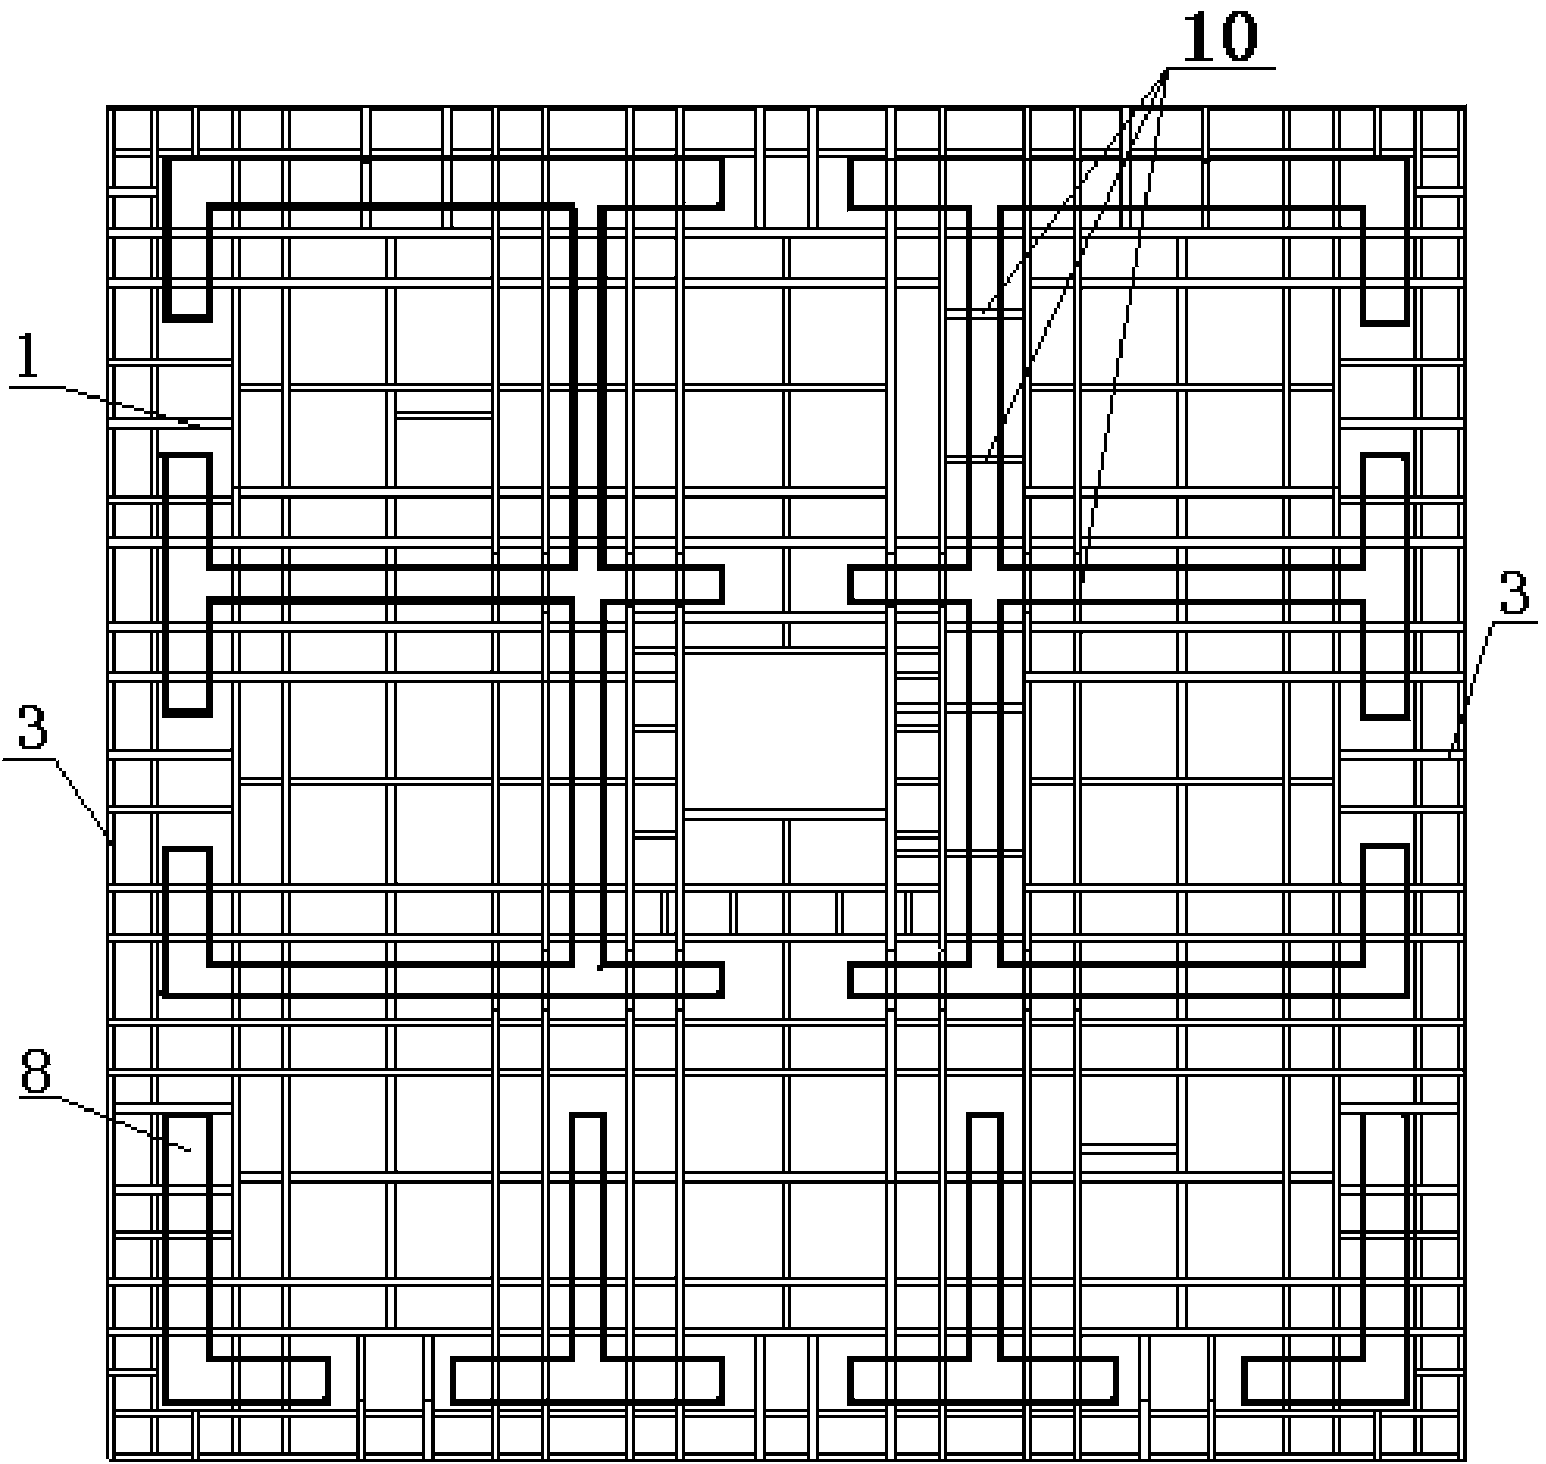 Drum frame supporting power built-in integrated jacking steel platform formwork system and construction method